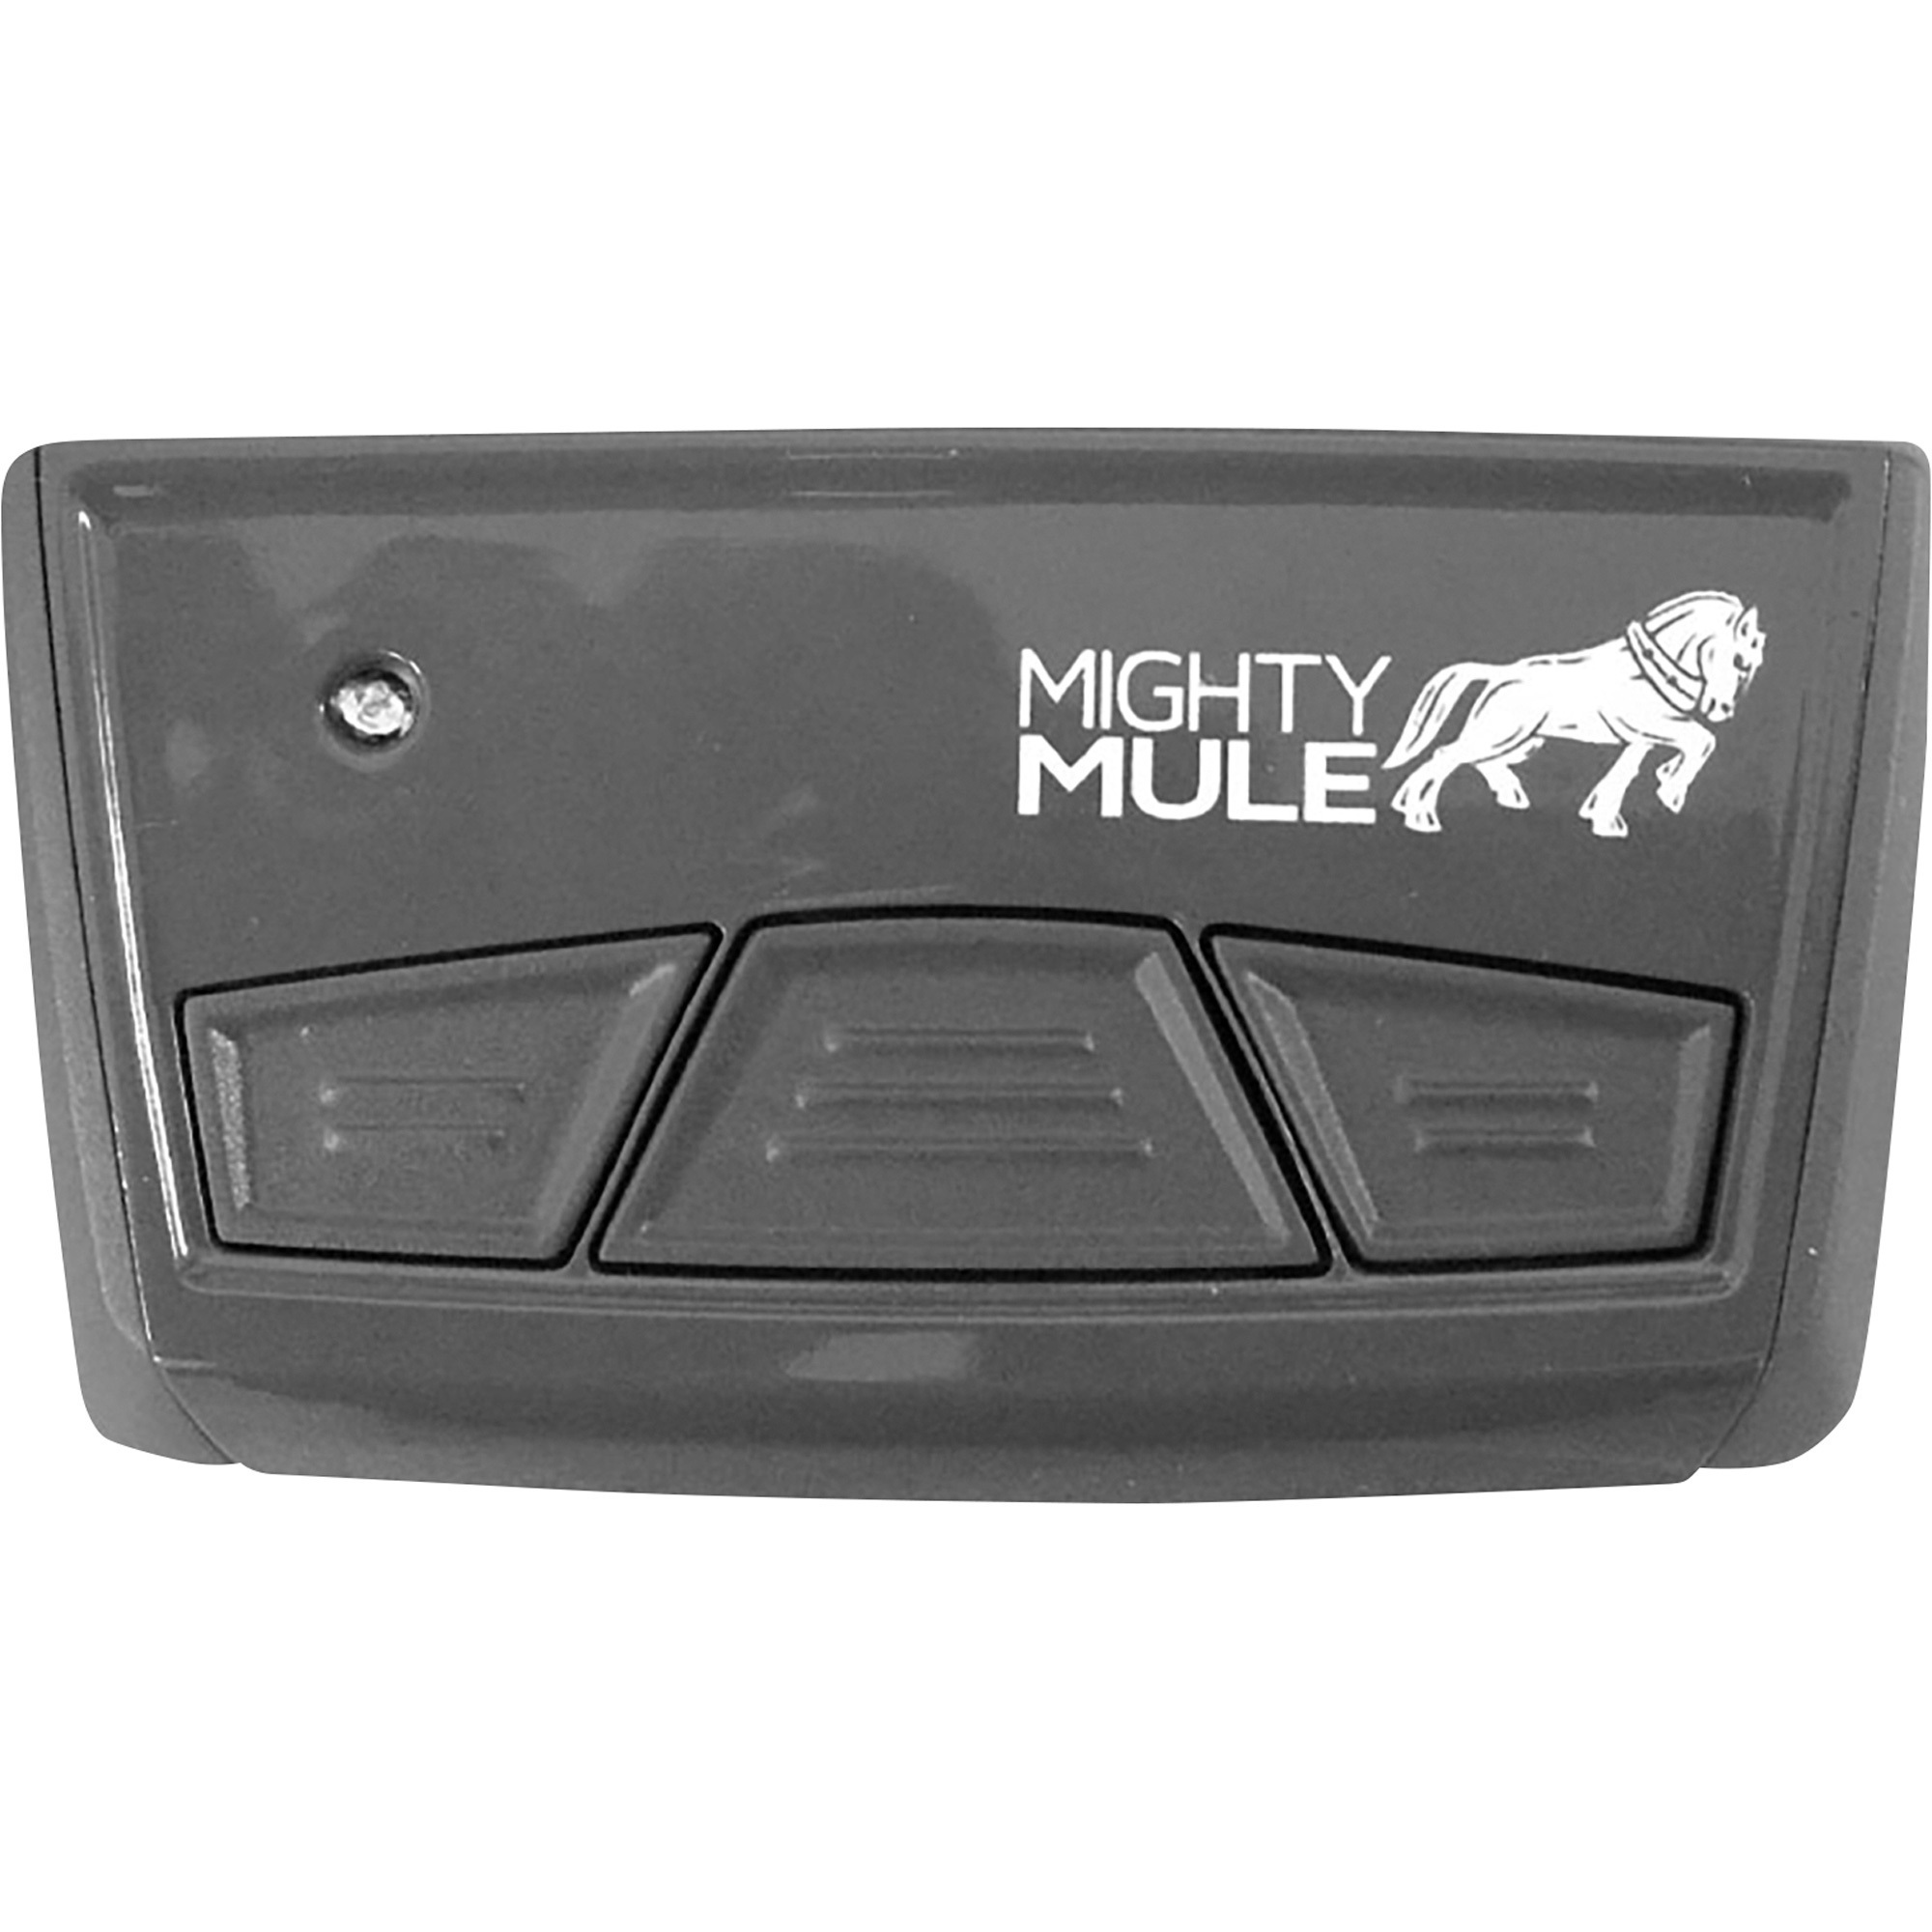 Mighty Mule 3-Button Transmitter â Fits Mighty Mule Gate and Garage Door Openers, MMT103